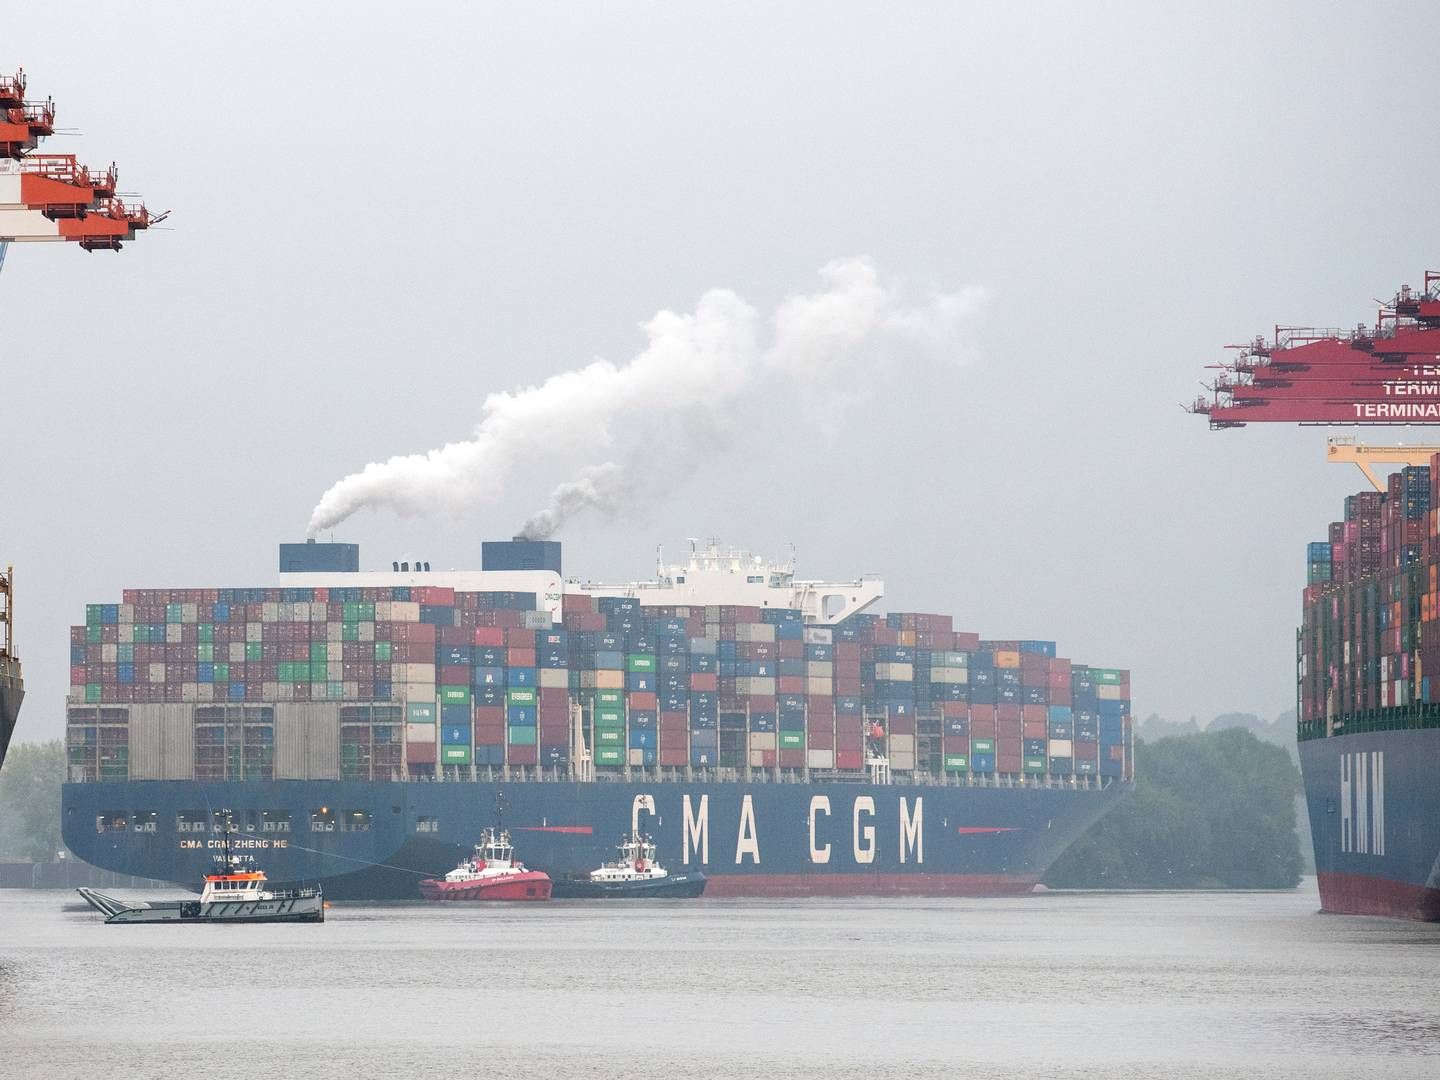 French carrier CMA CGM and South Korean HMM have both ordered ships that can sail on green methanol. | Foto: Daniel Bockwoldt/AP/Ritzau Scanpix